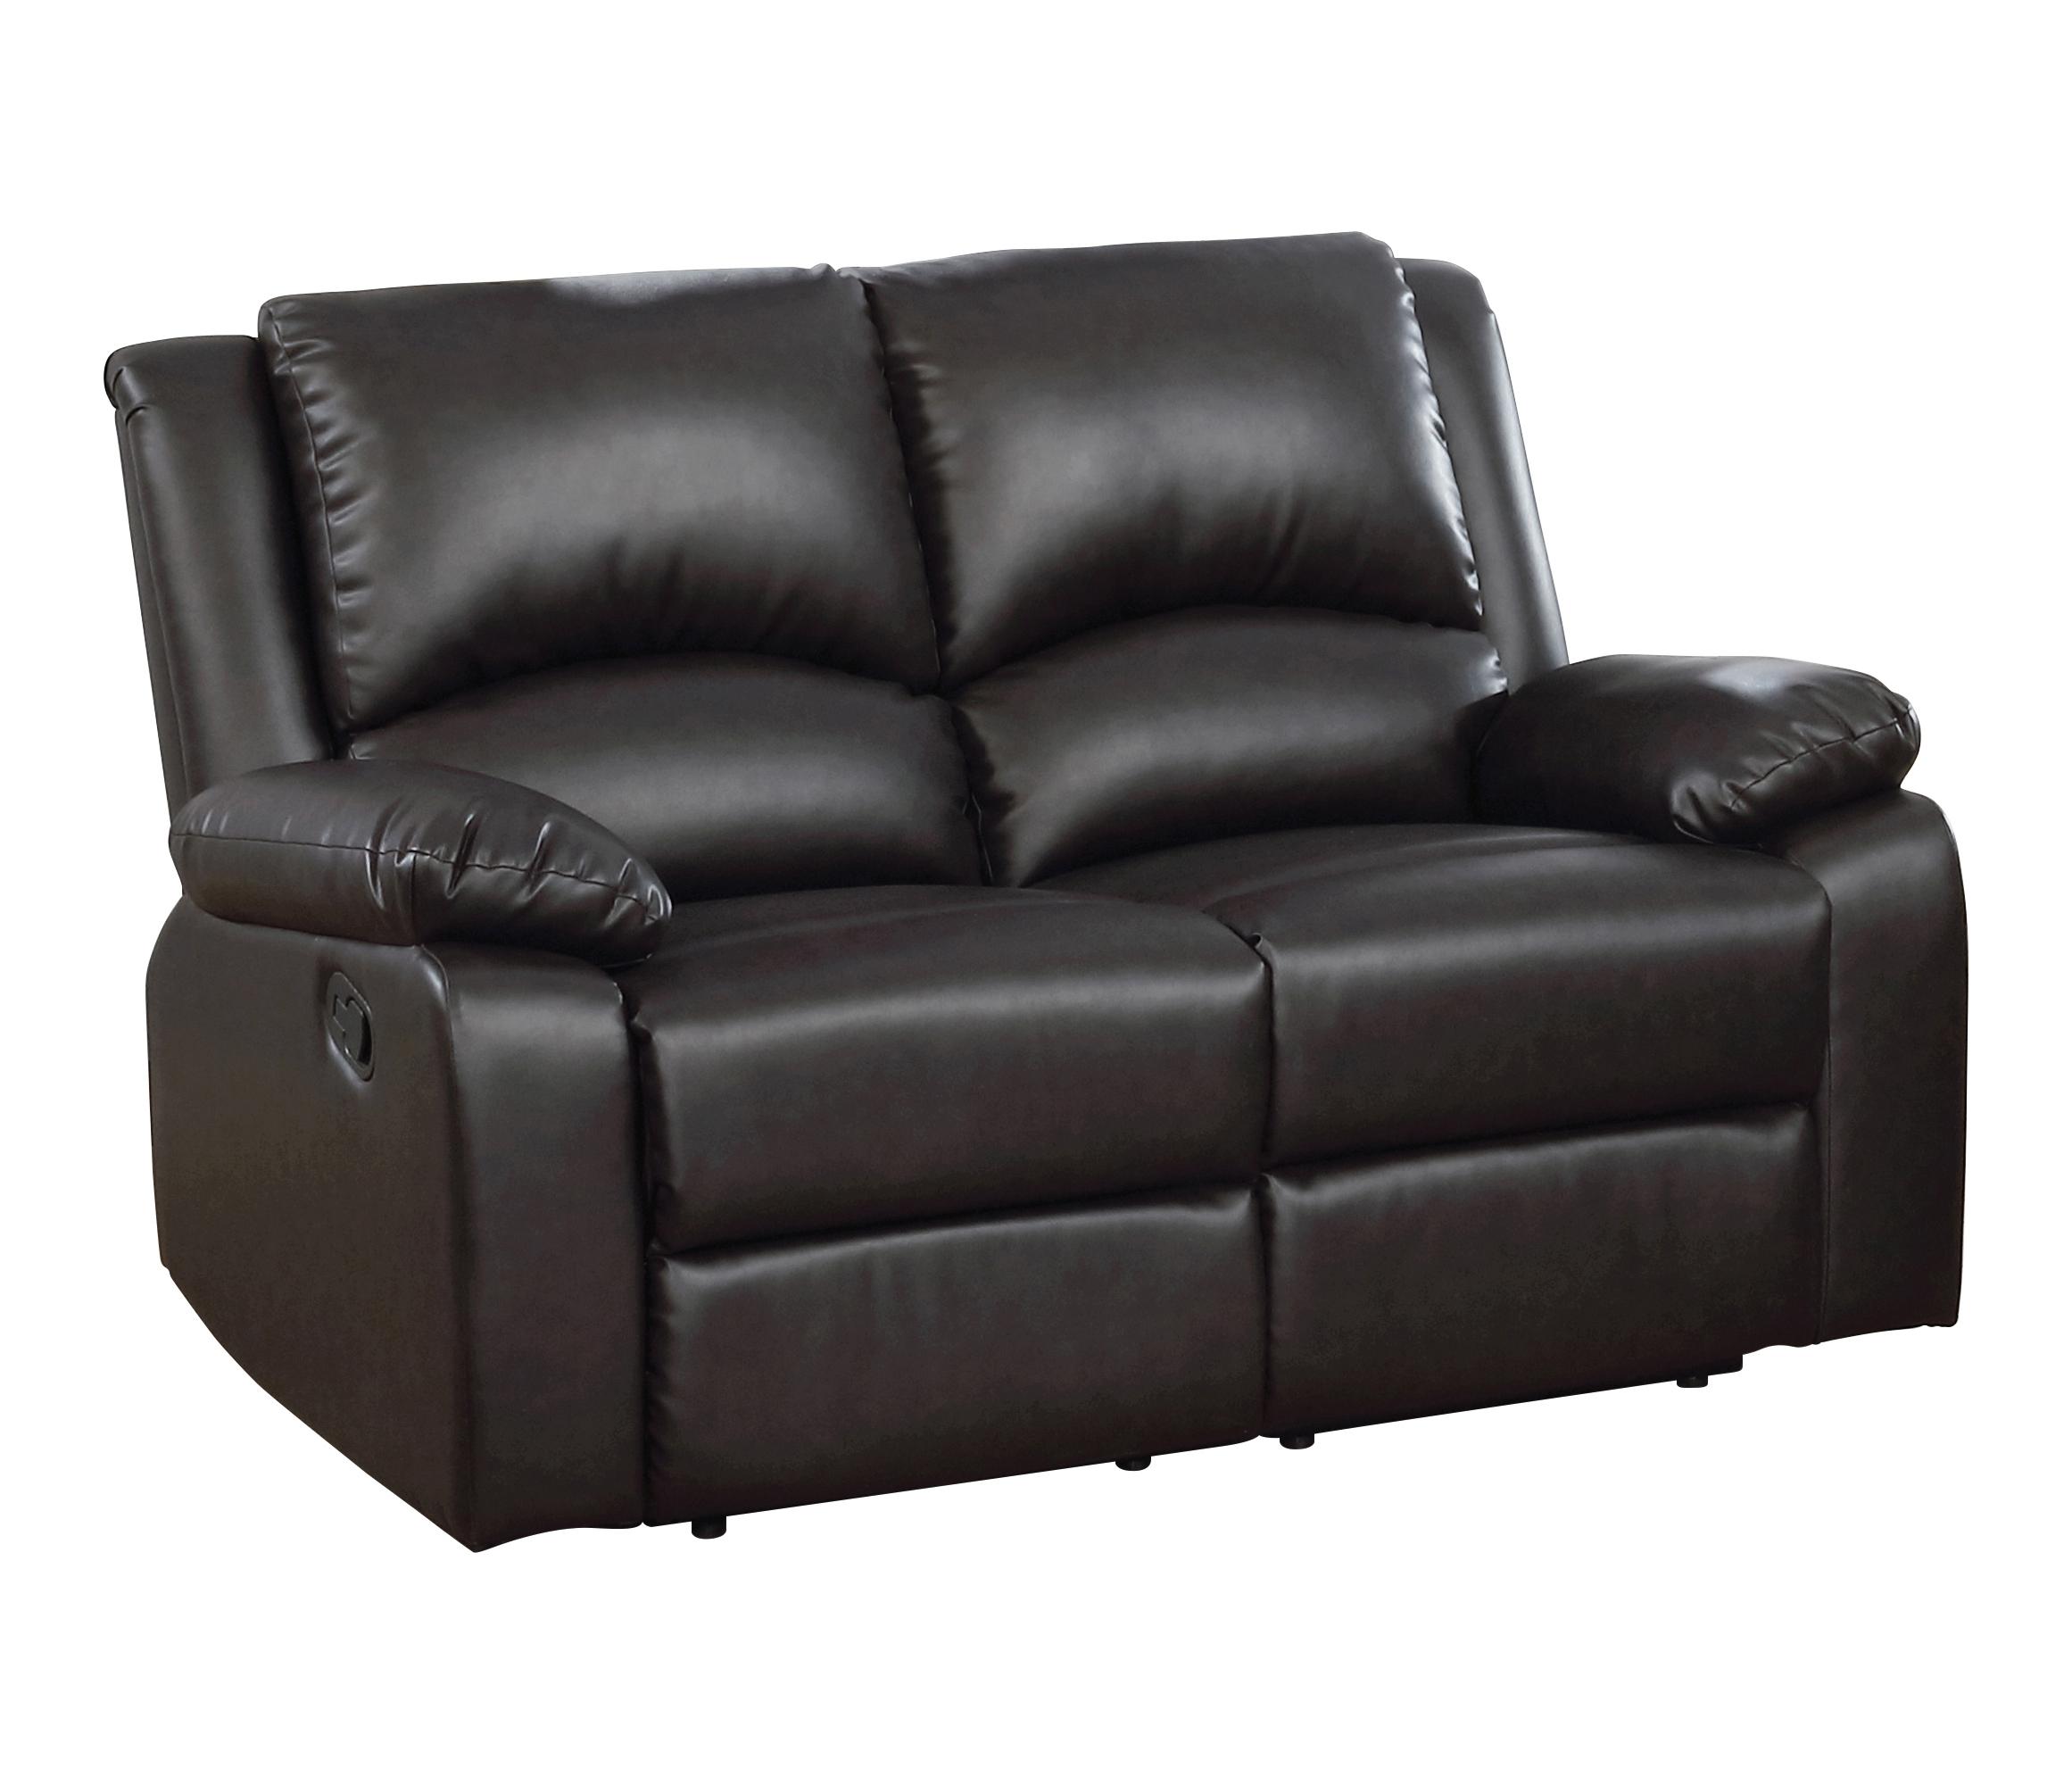 Transitional Motion Loveseat 600972 Boston 600972 in Brown Leatherette